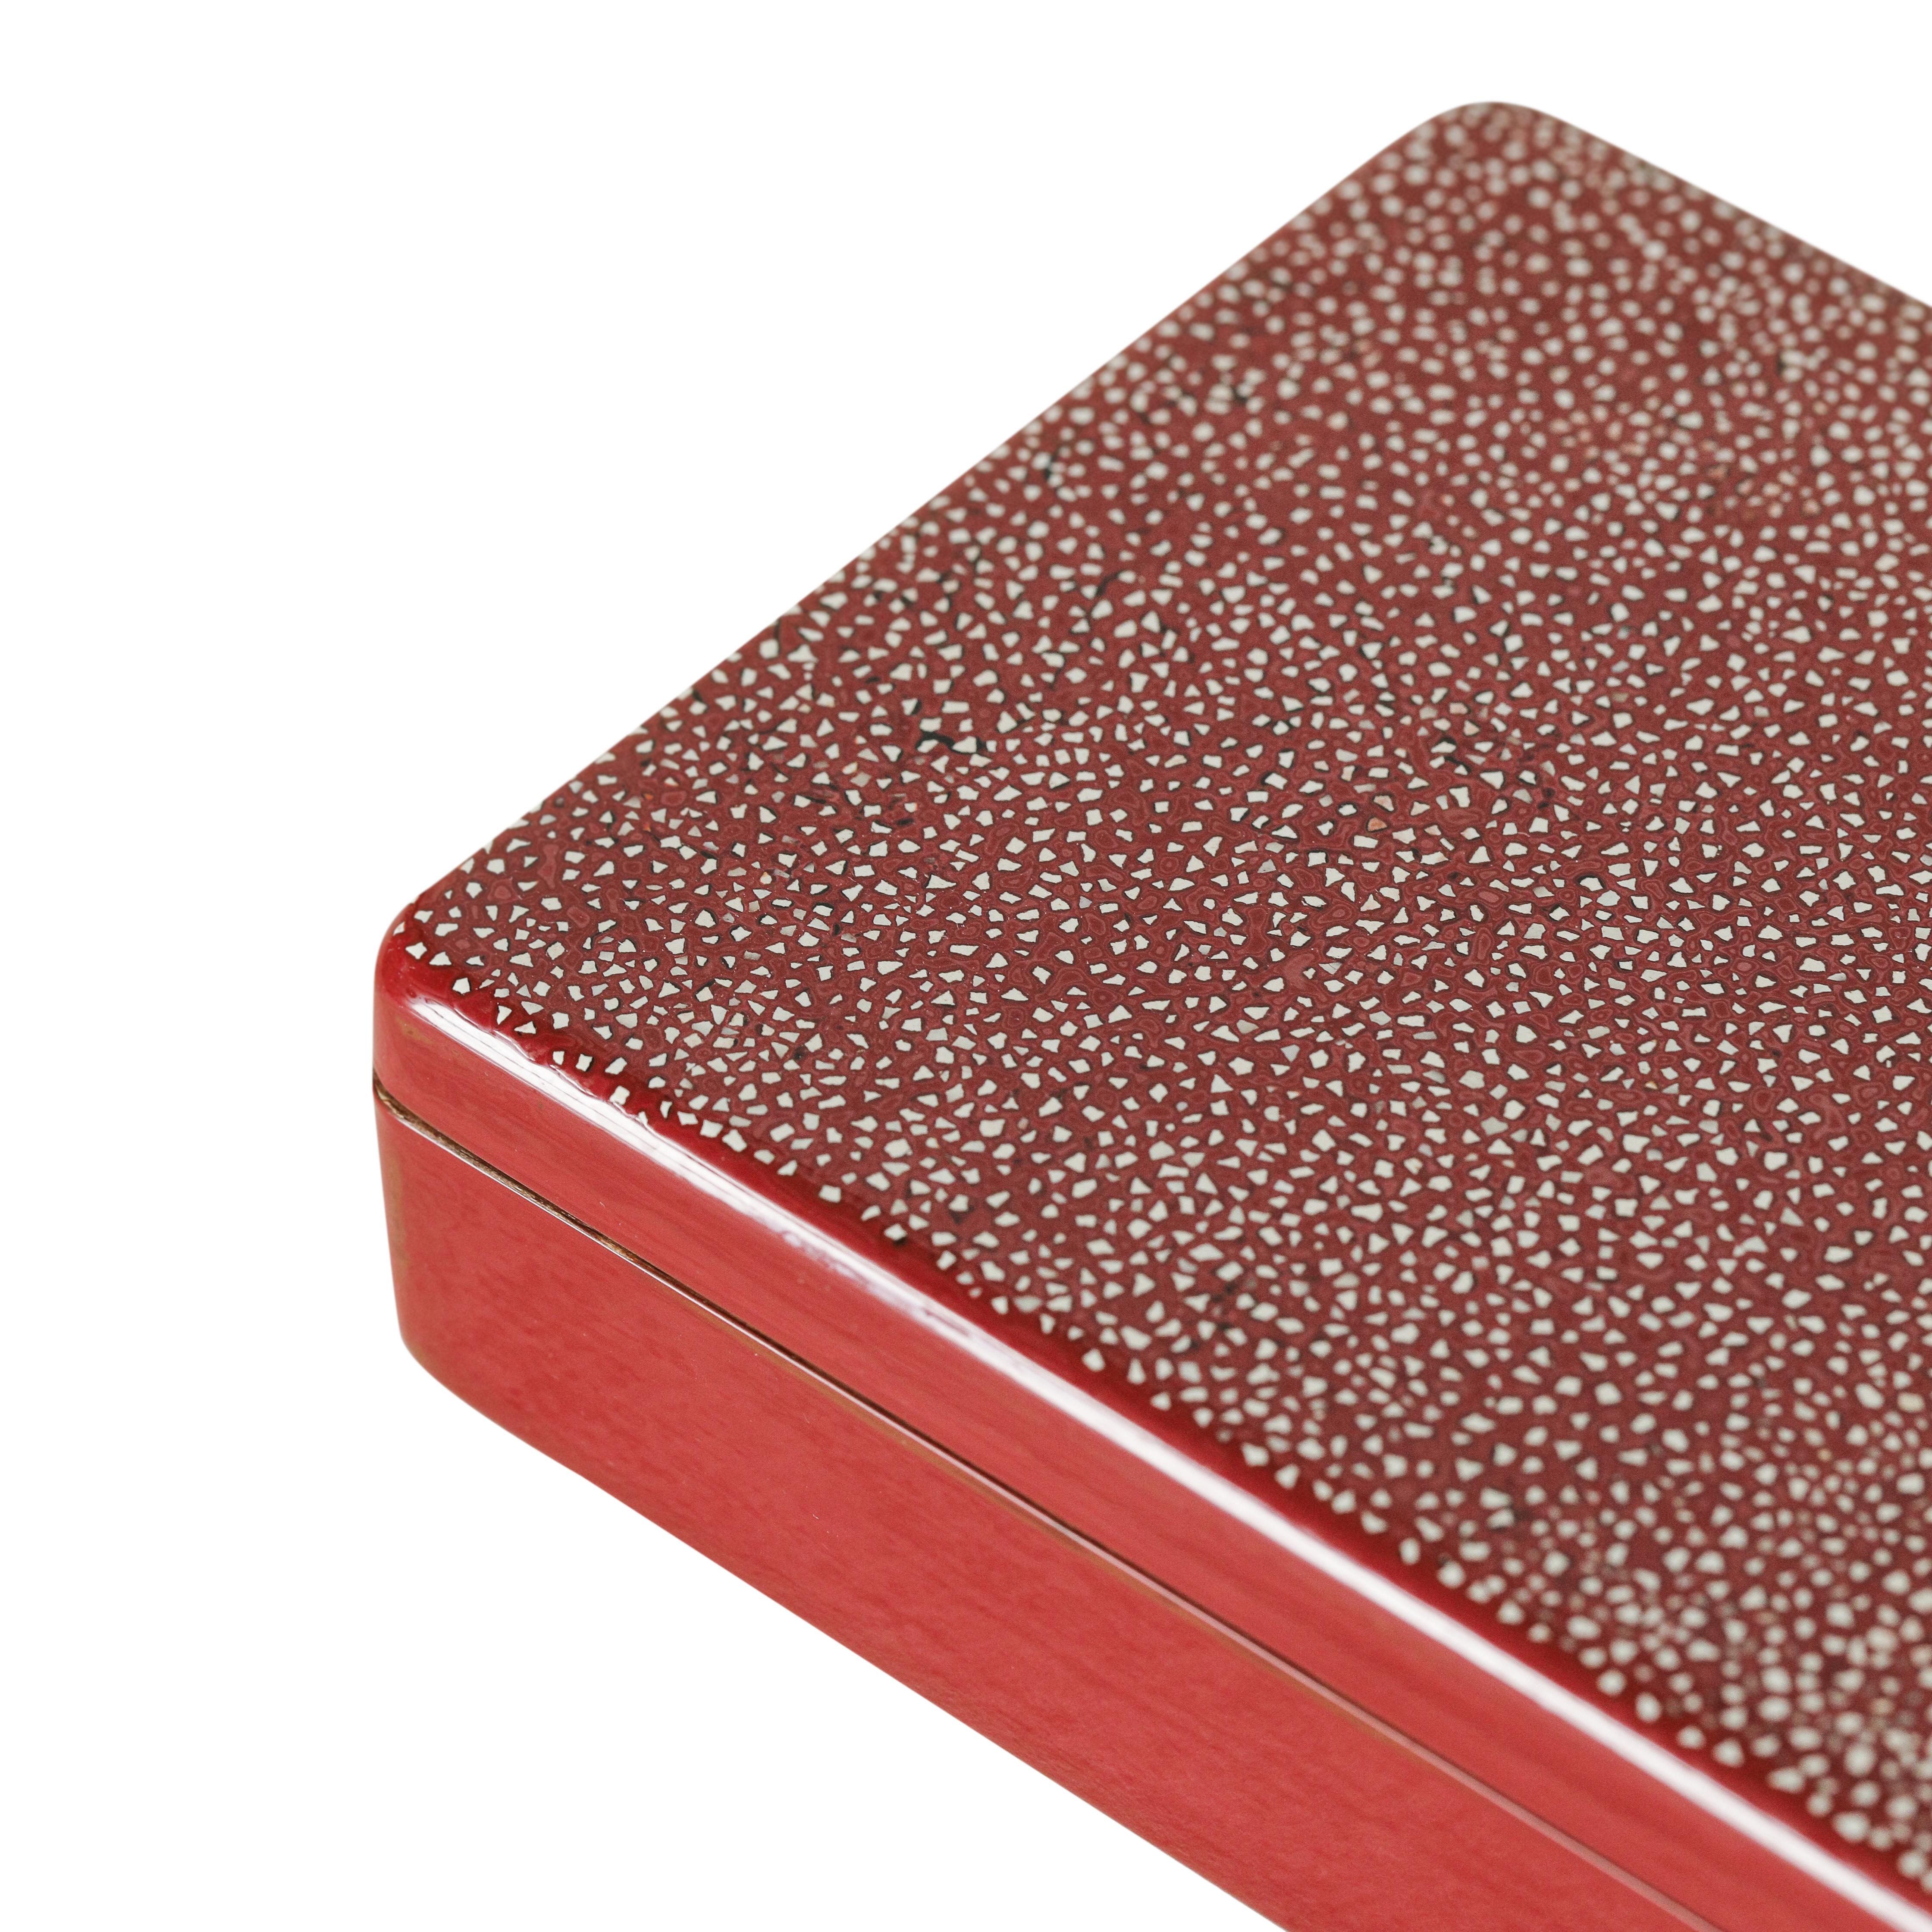 Hand-Crafted Urushi Natural Red Lacquer Allsorts Box - Large by Alexander Lamont For Sale